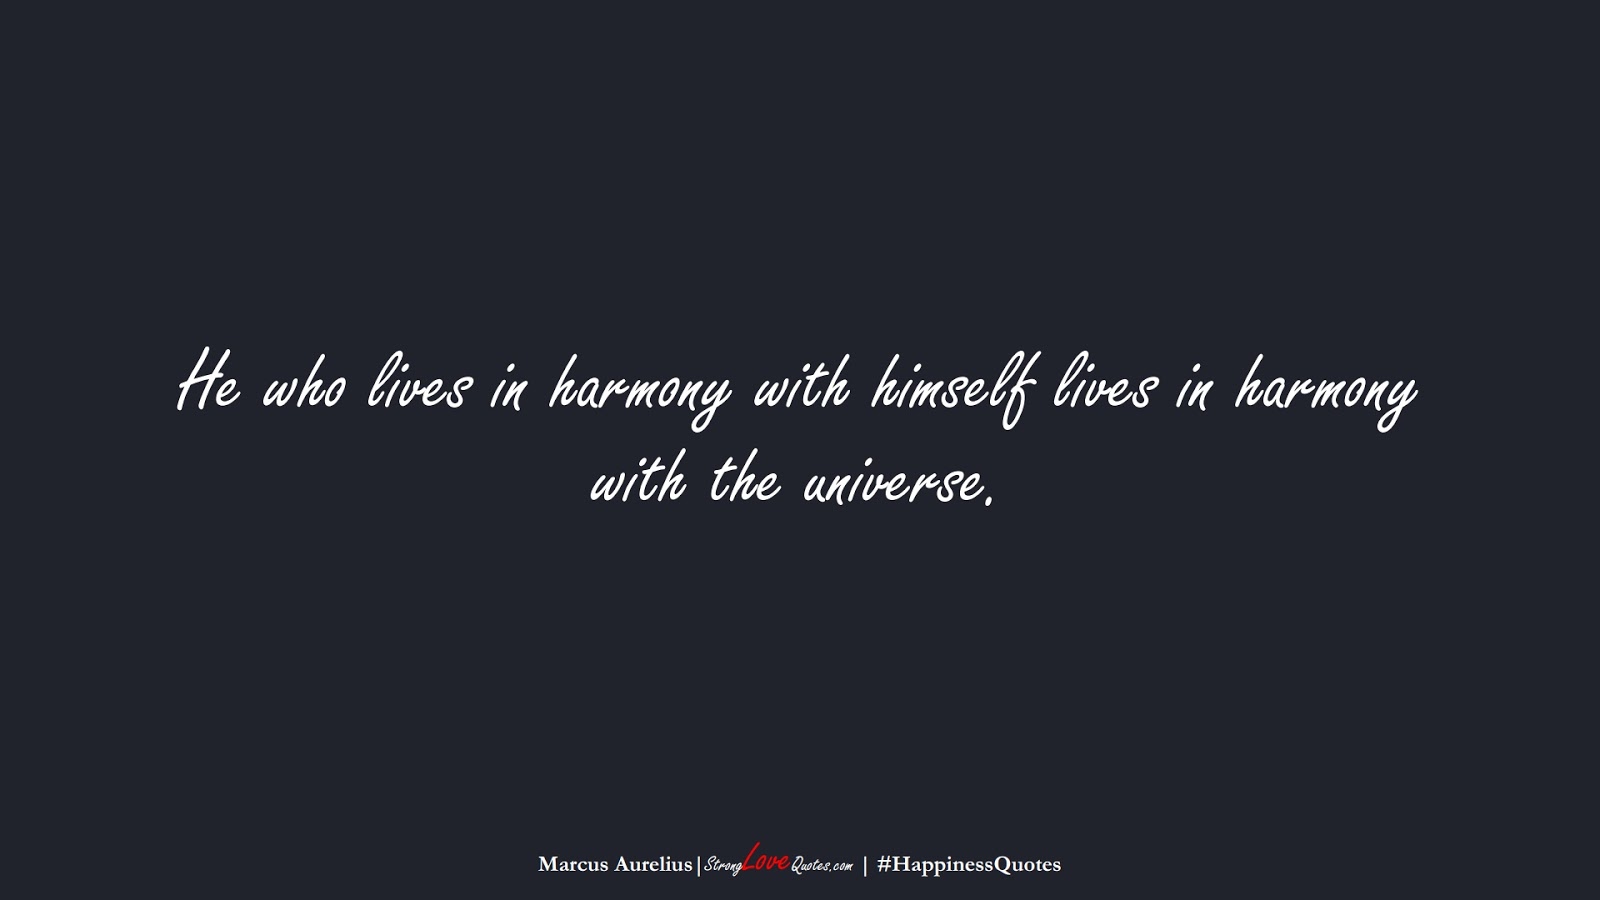 He who lives in harmony with himself lives in harmony with the universe. (Marcus Aurelius);  #HappinessQuotes